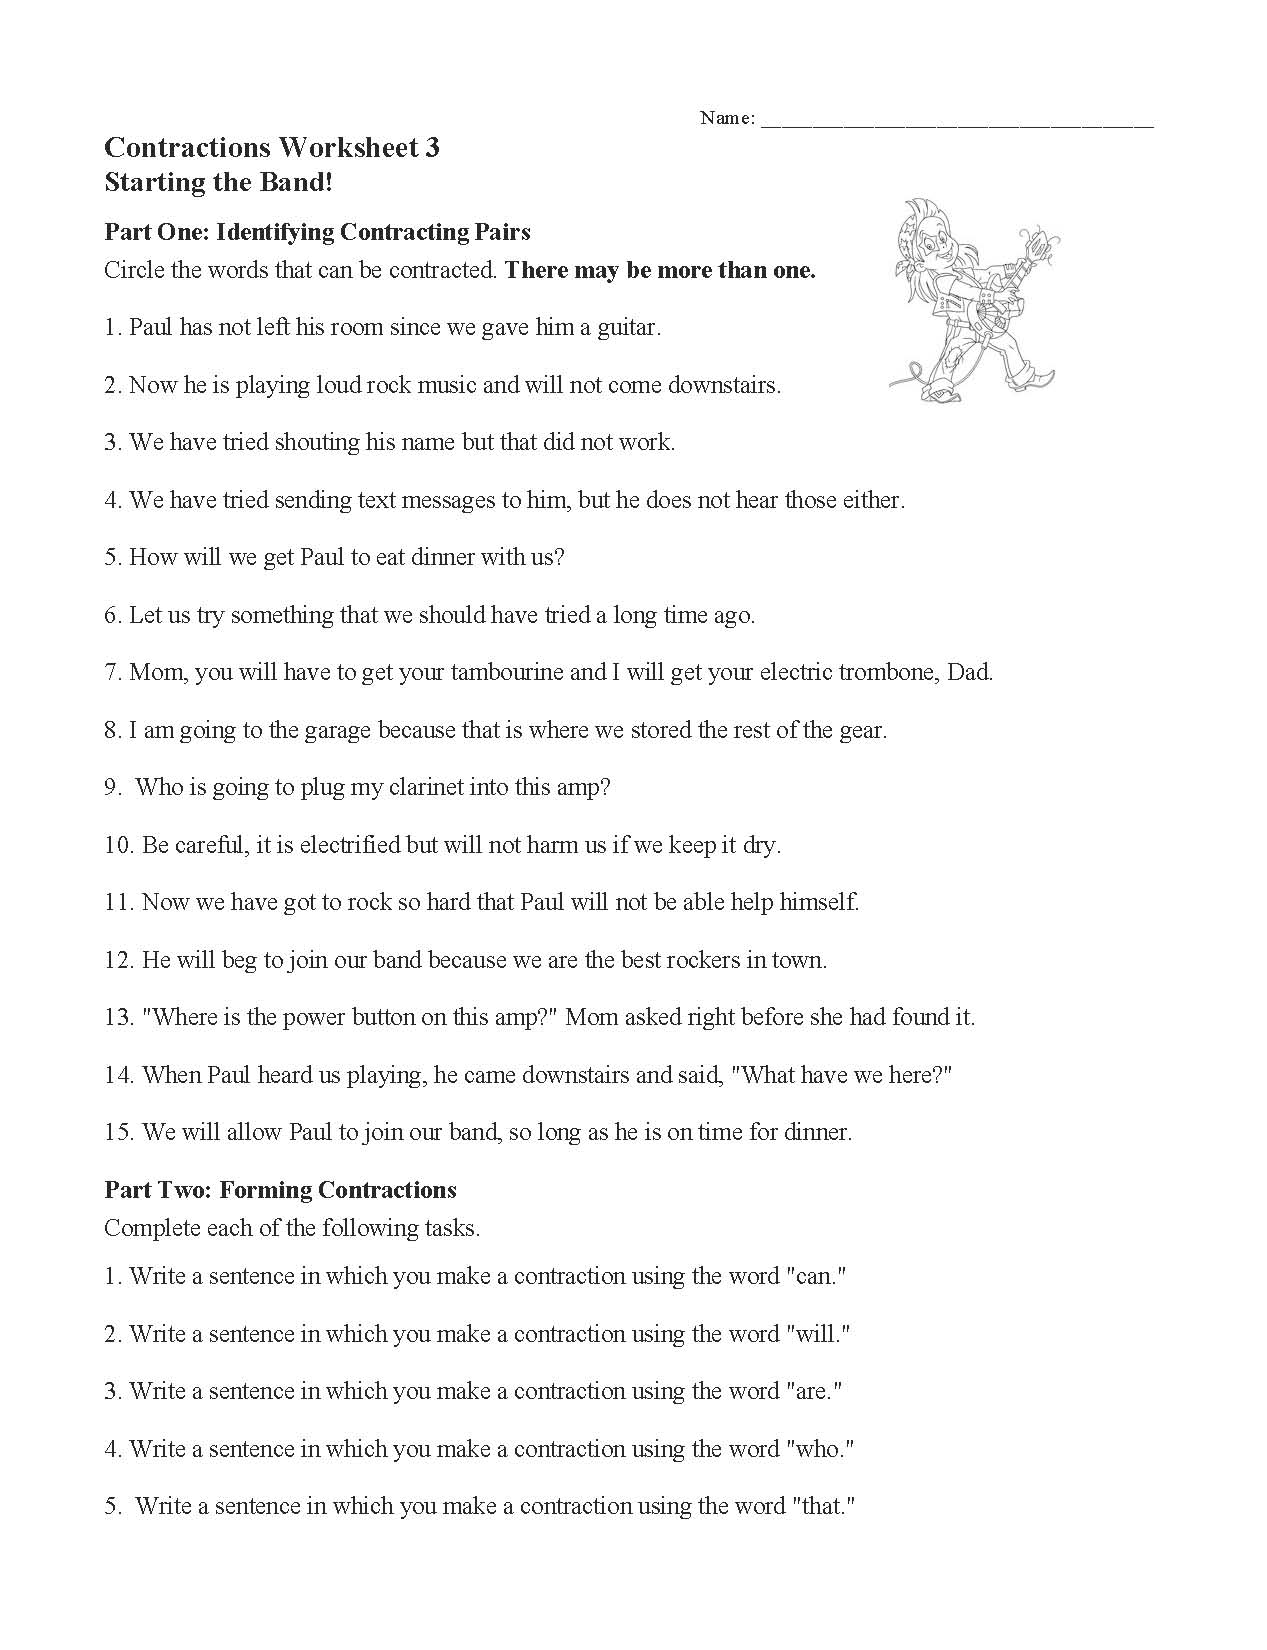 Contractions Worksheet 3 Preview